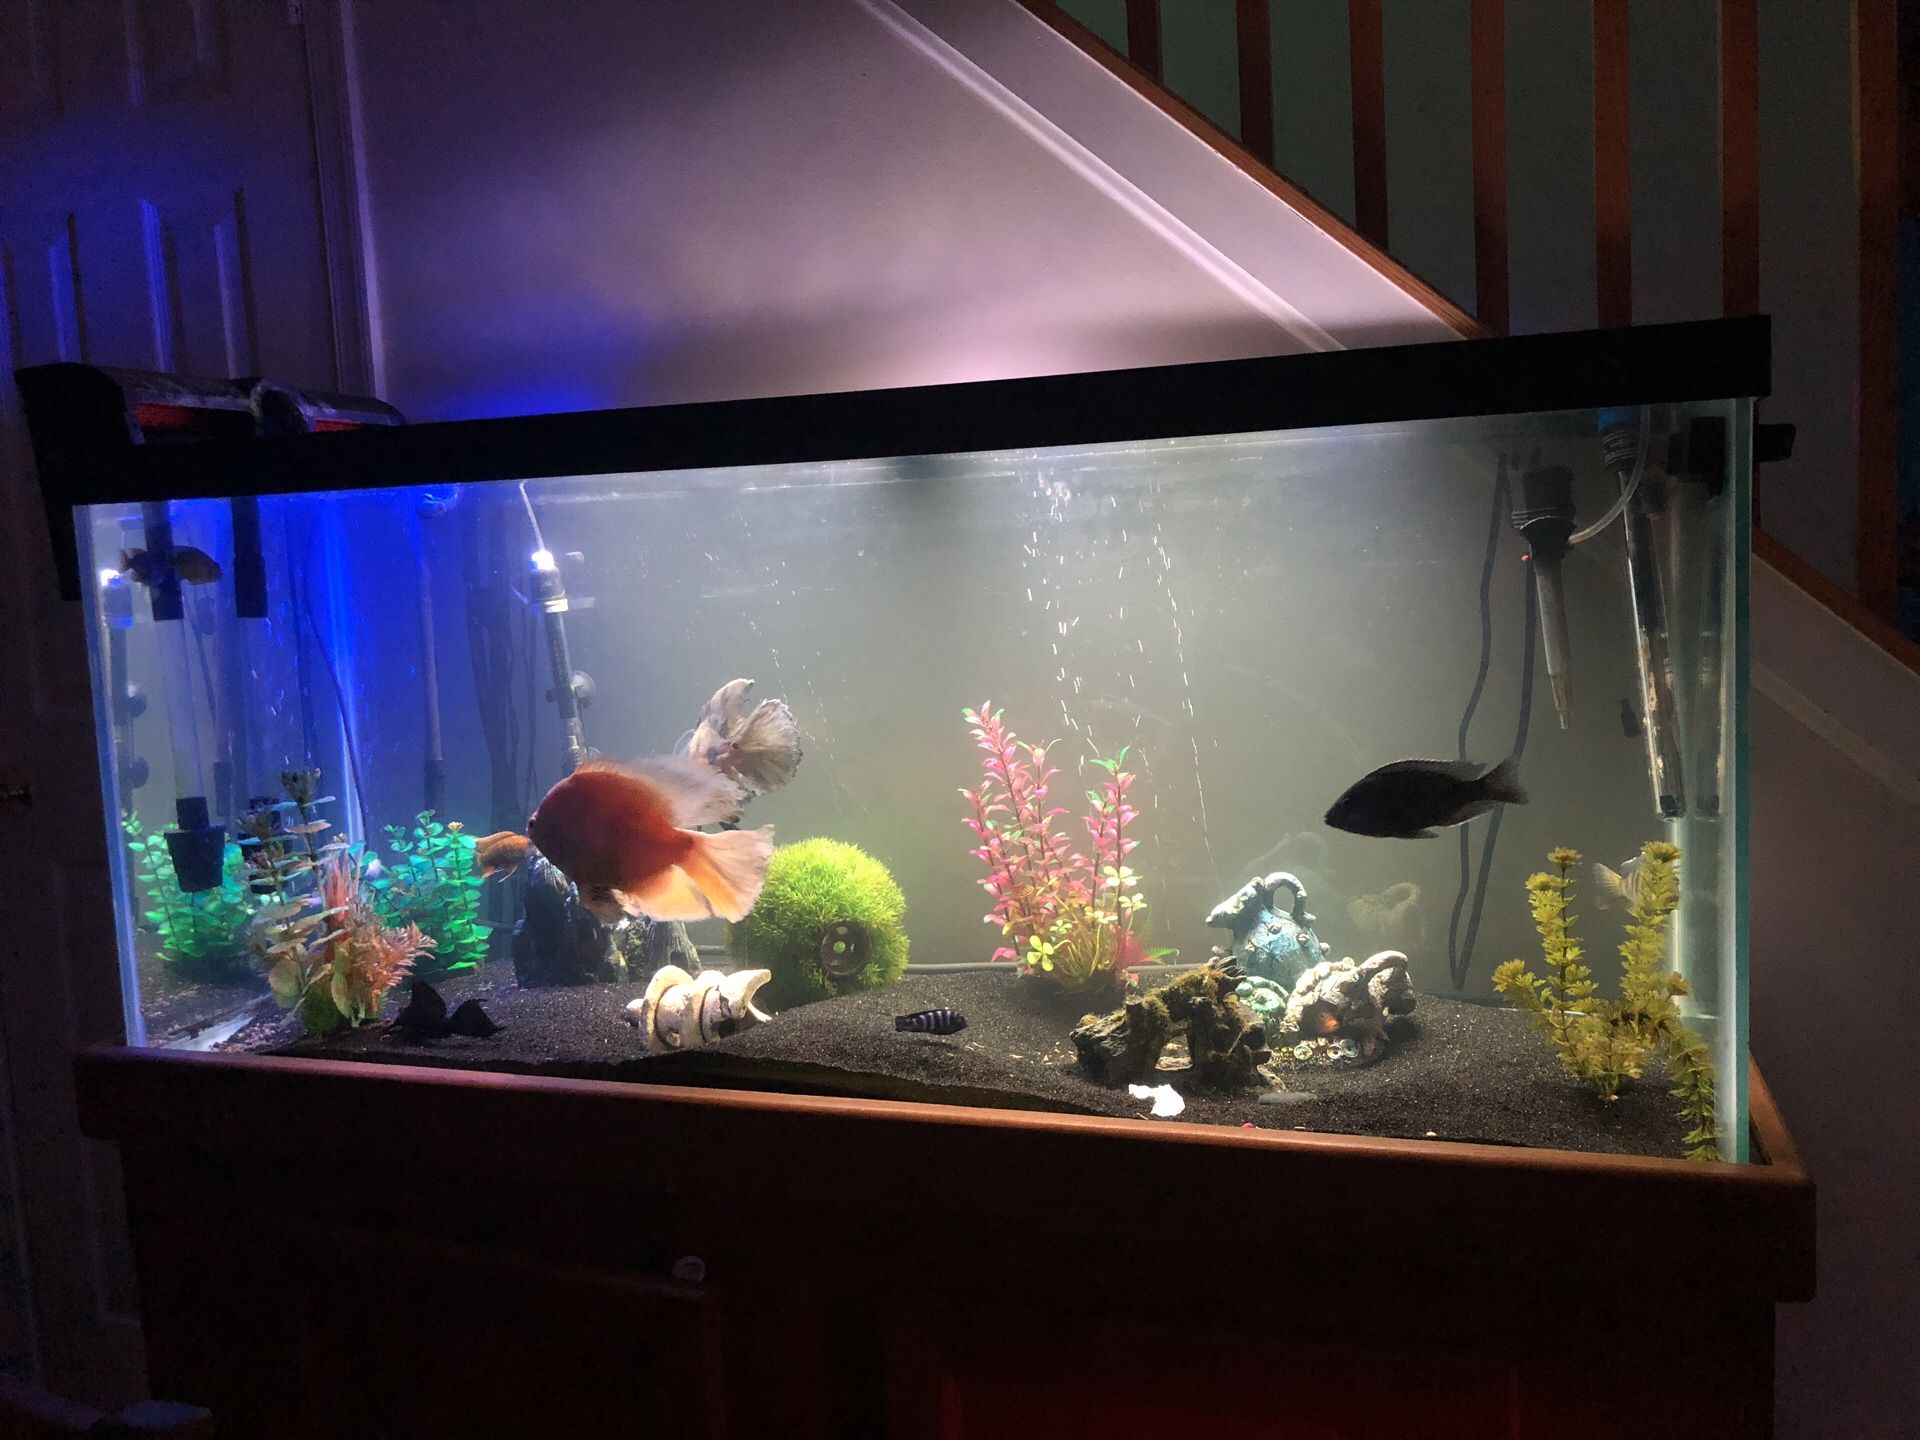 75 gallon fish tank w/ all you see and filters fish too your looking at an assortment of different species and breads of African Chilids and South Am